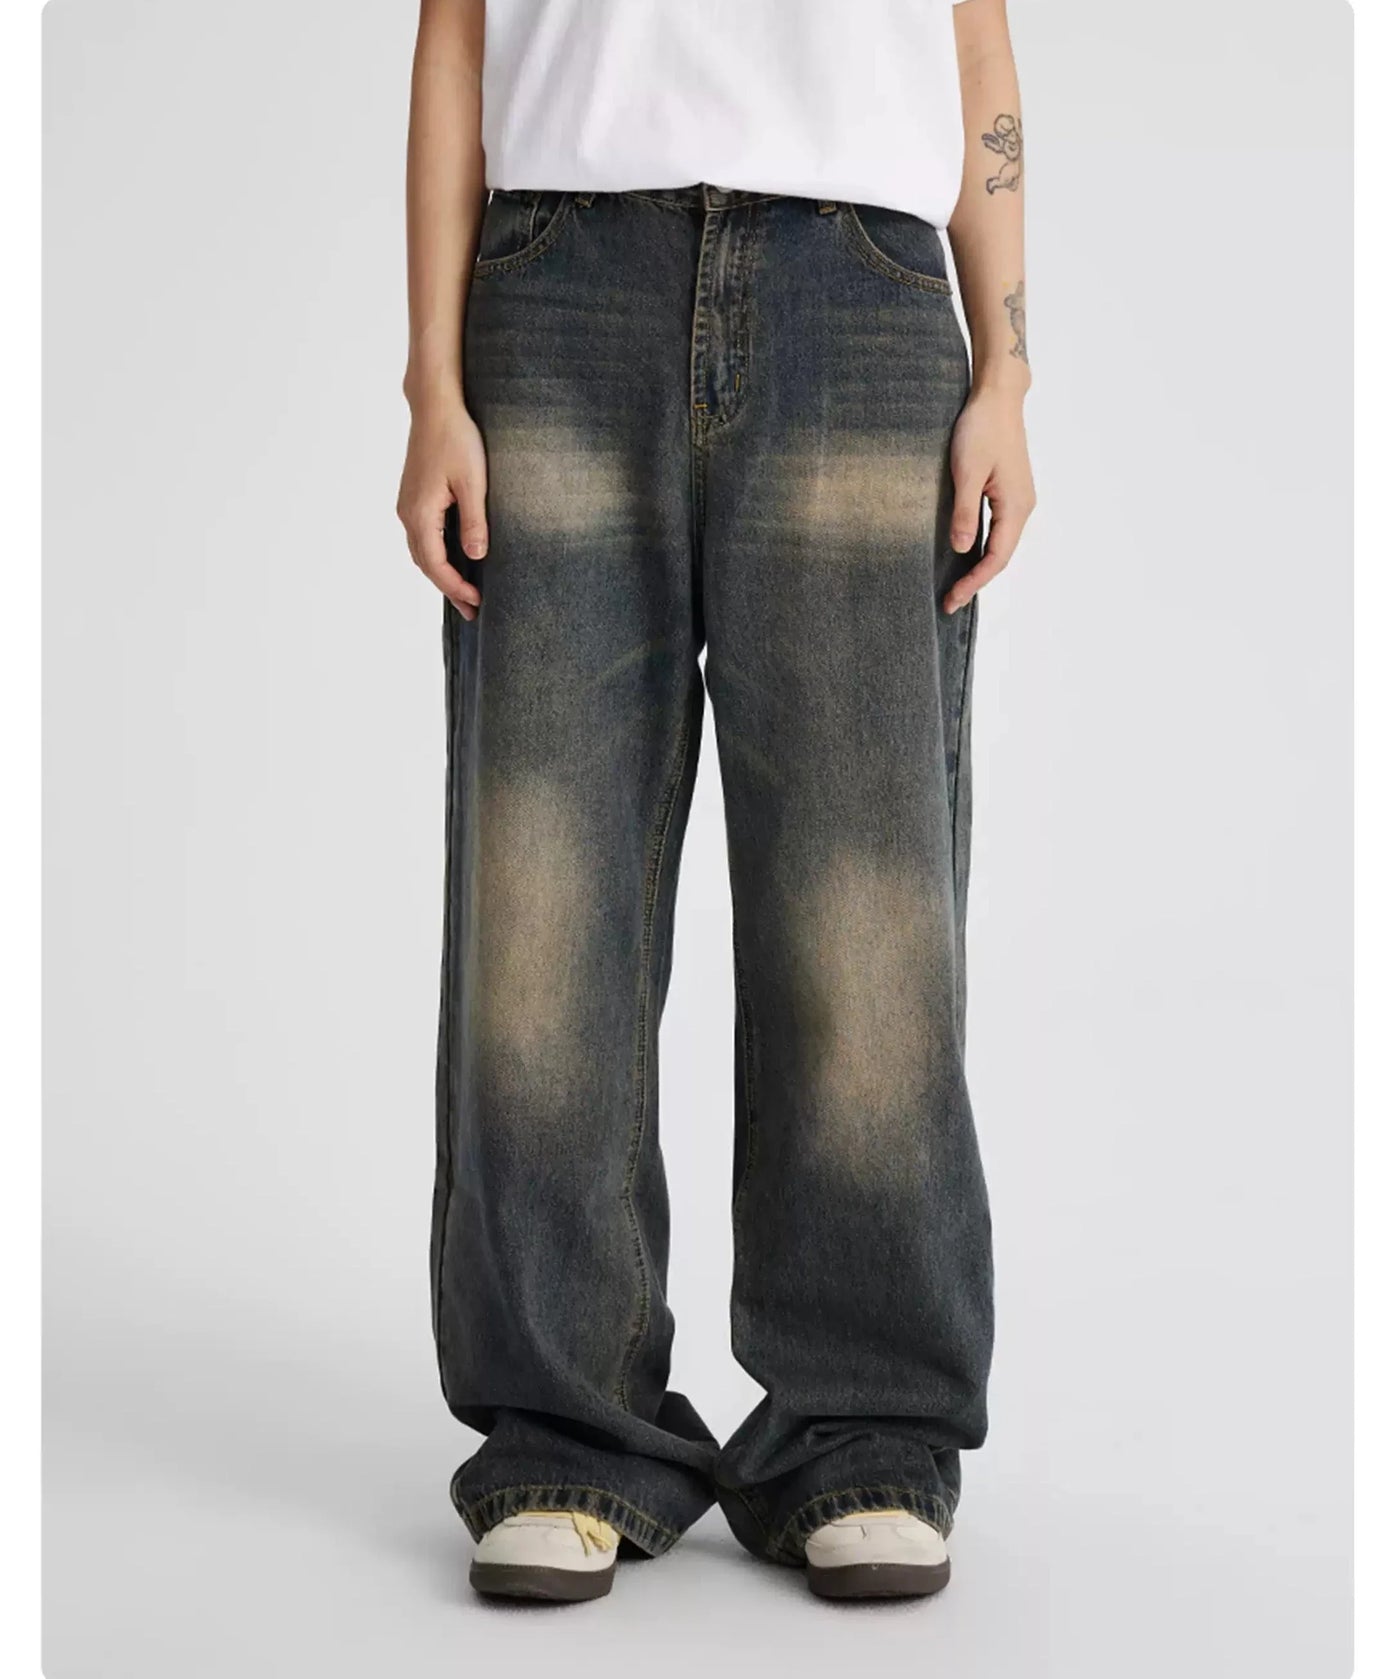 Fade Spots Comfty Jeans Korean Street Fashion Jeans By WORKSOUT Shop Online at OH Vault